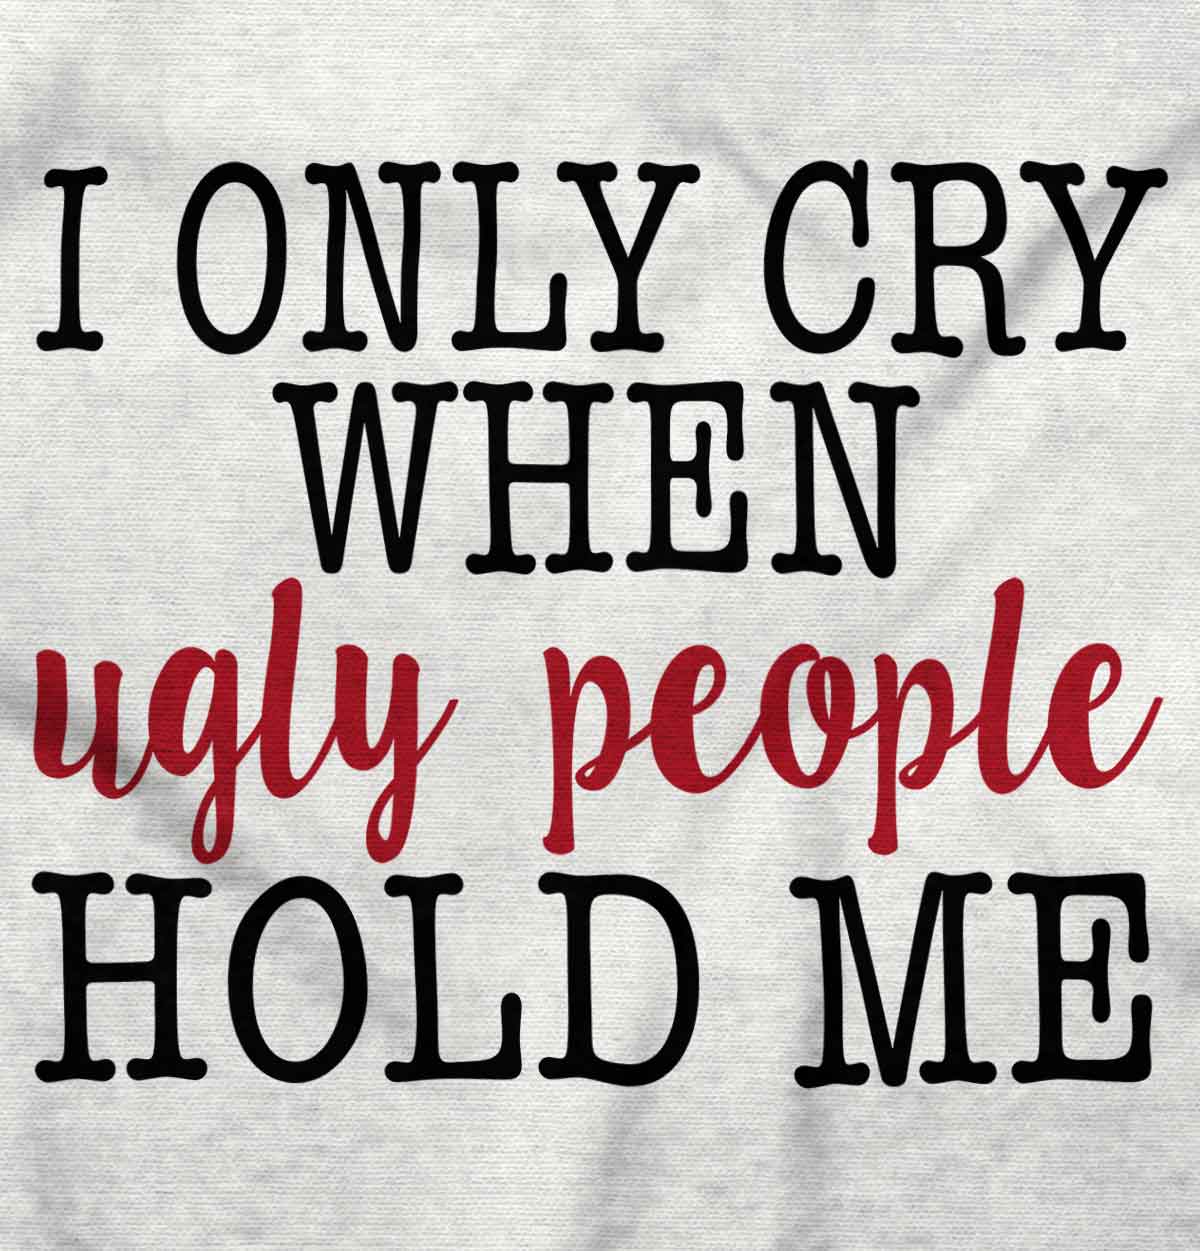 I only Cry When Ugly People Hold Me Funny T shirt For Baby